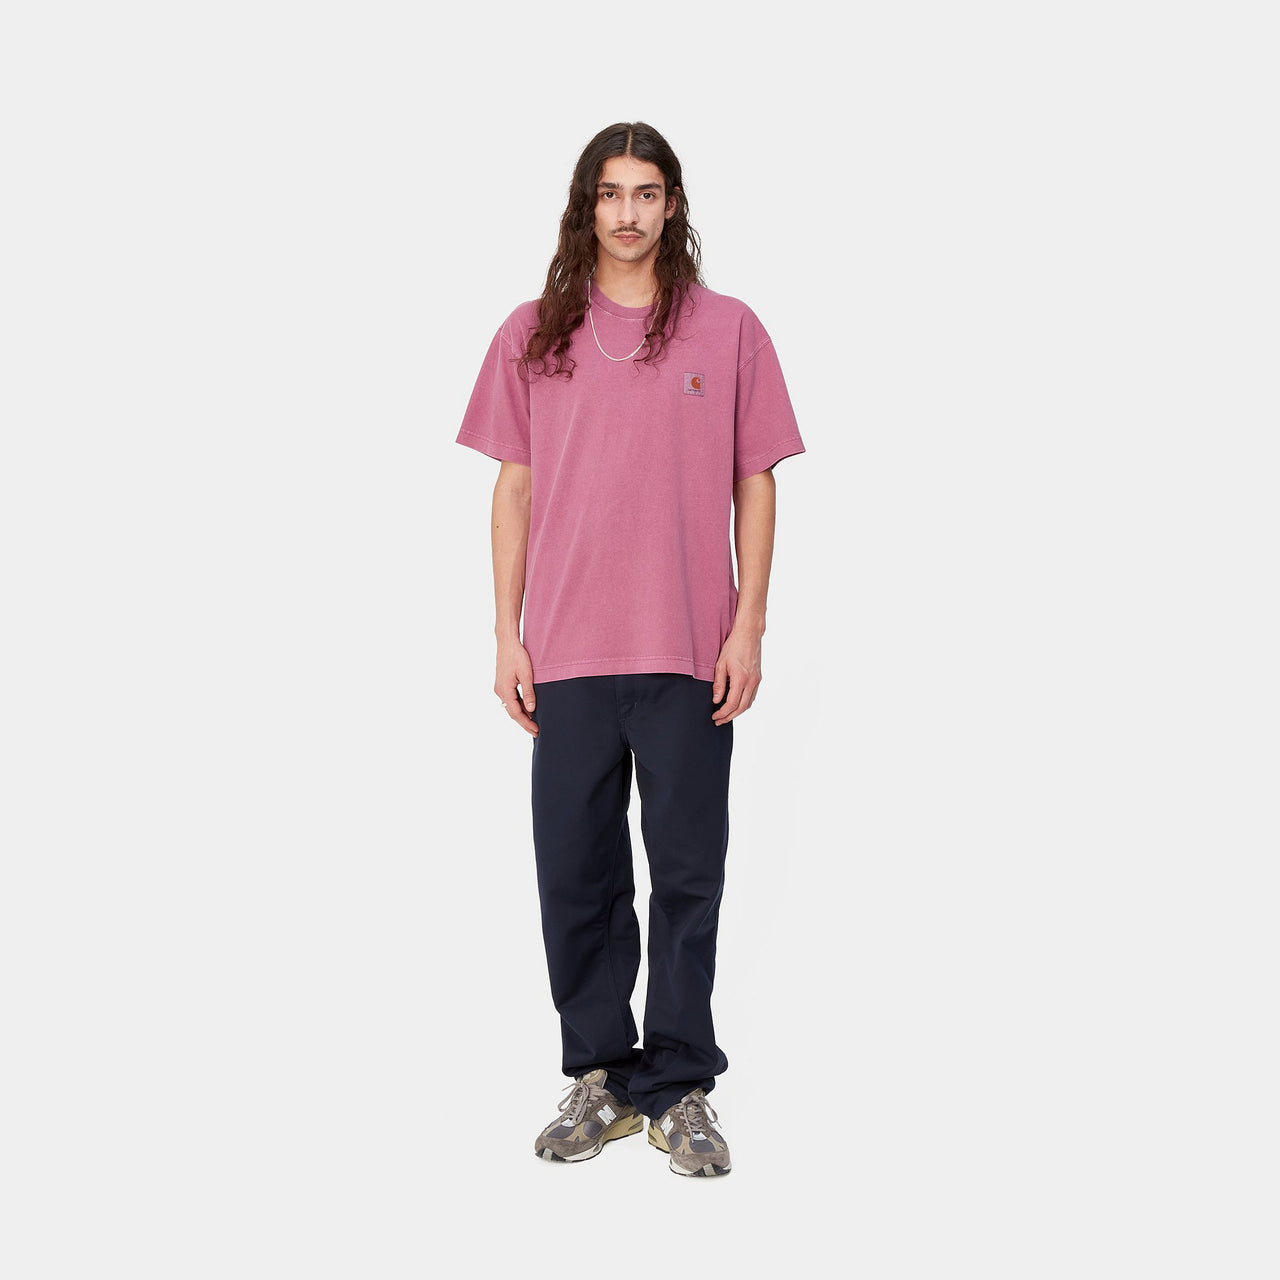 S/S NELSON T-SHIRT BY CARHARTT WIP